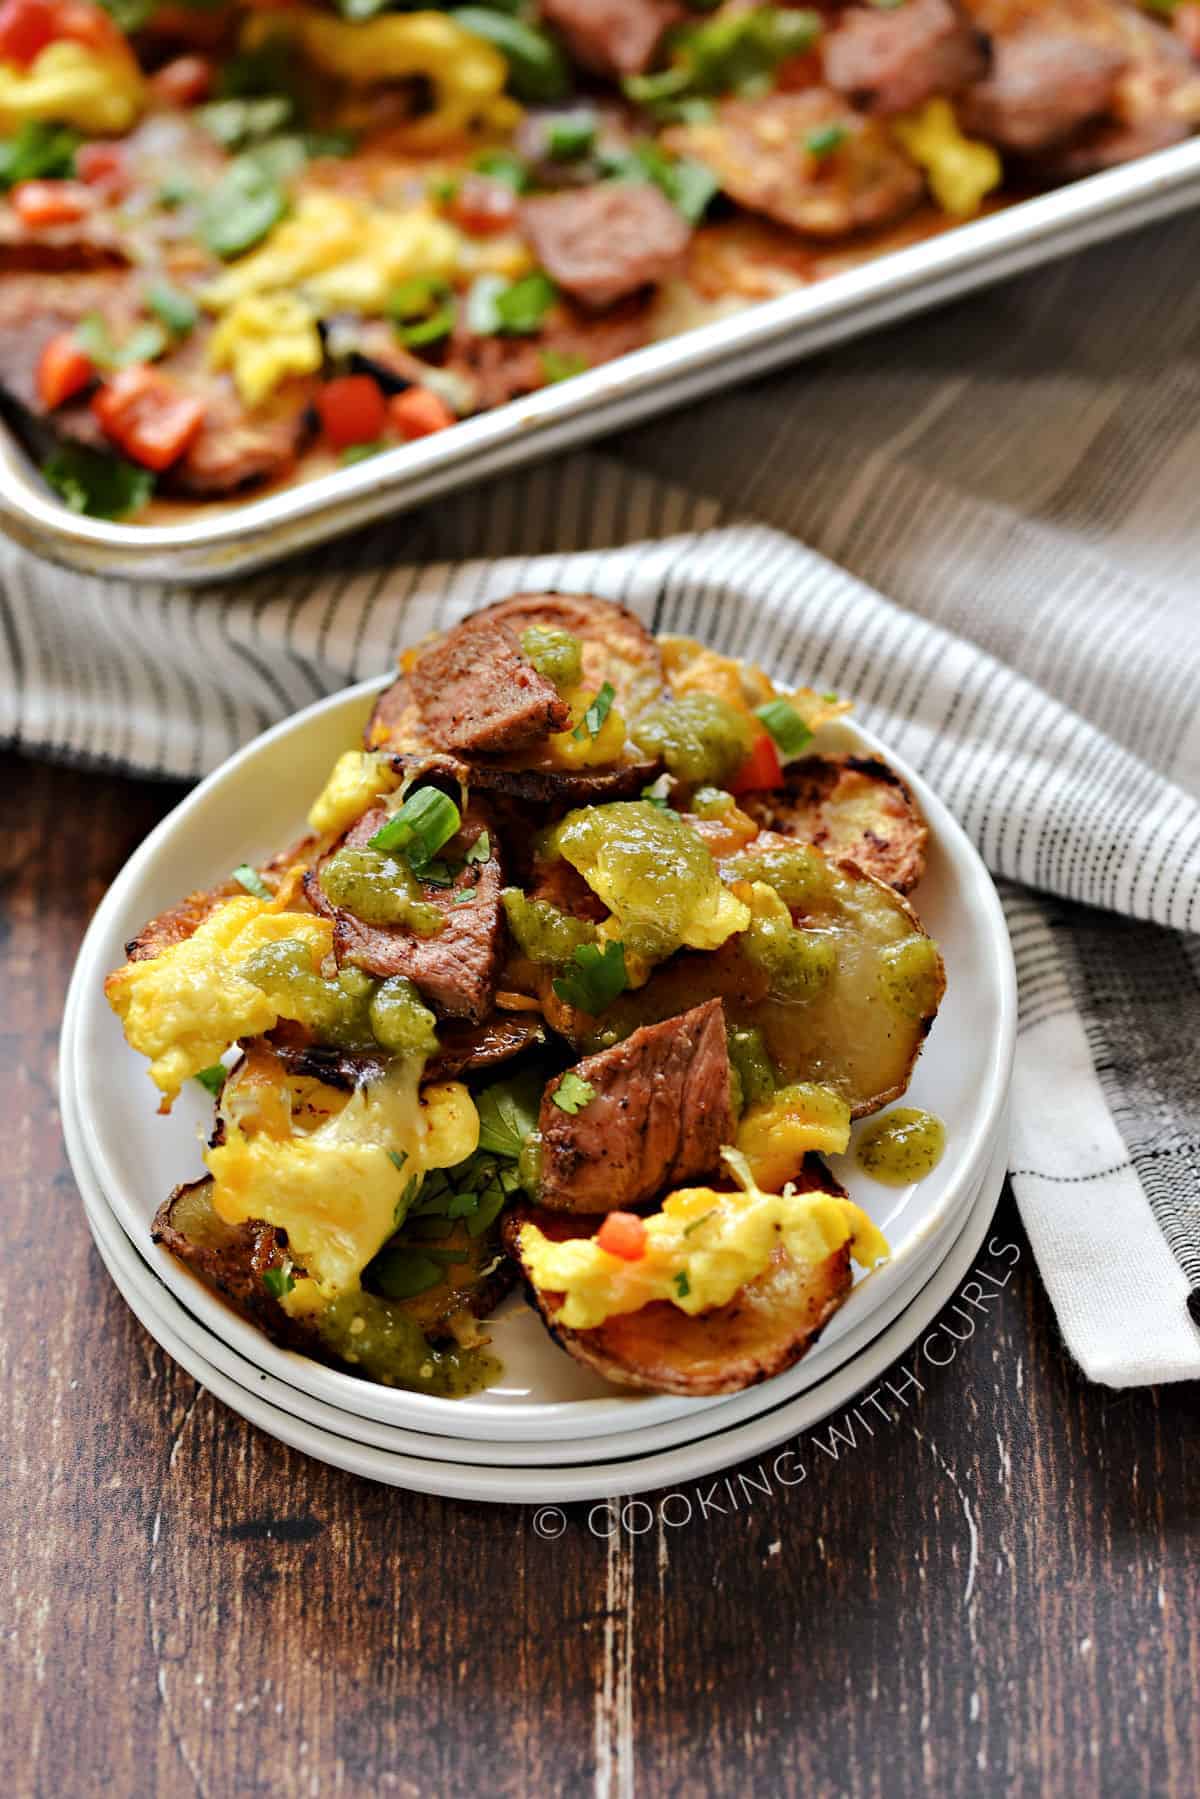 Baked potato slices topped with scrambled eggs, cheese, steak, and salsa verde. 